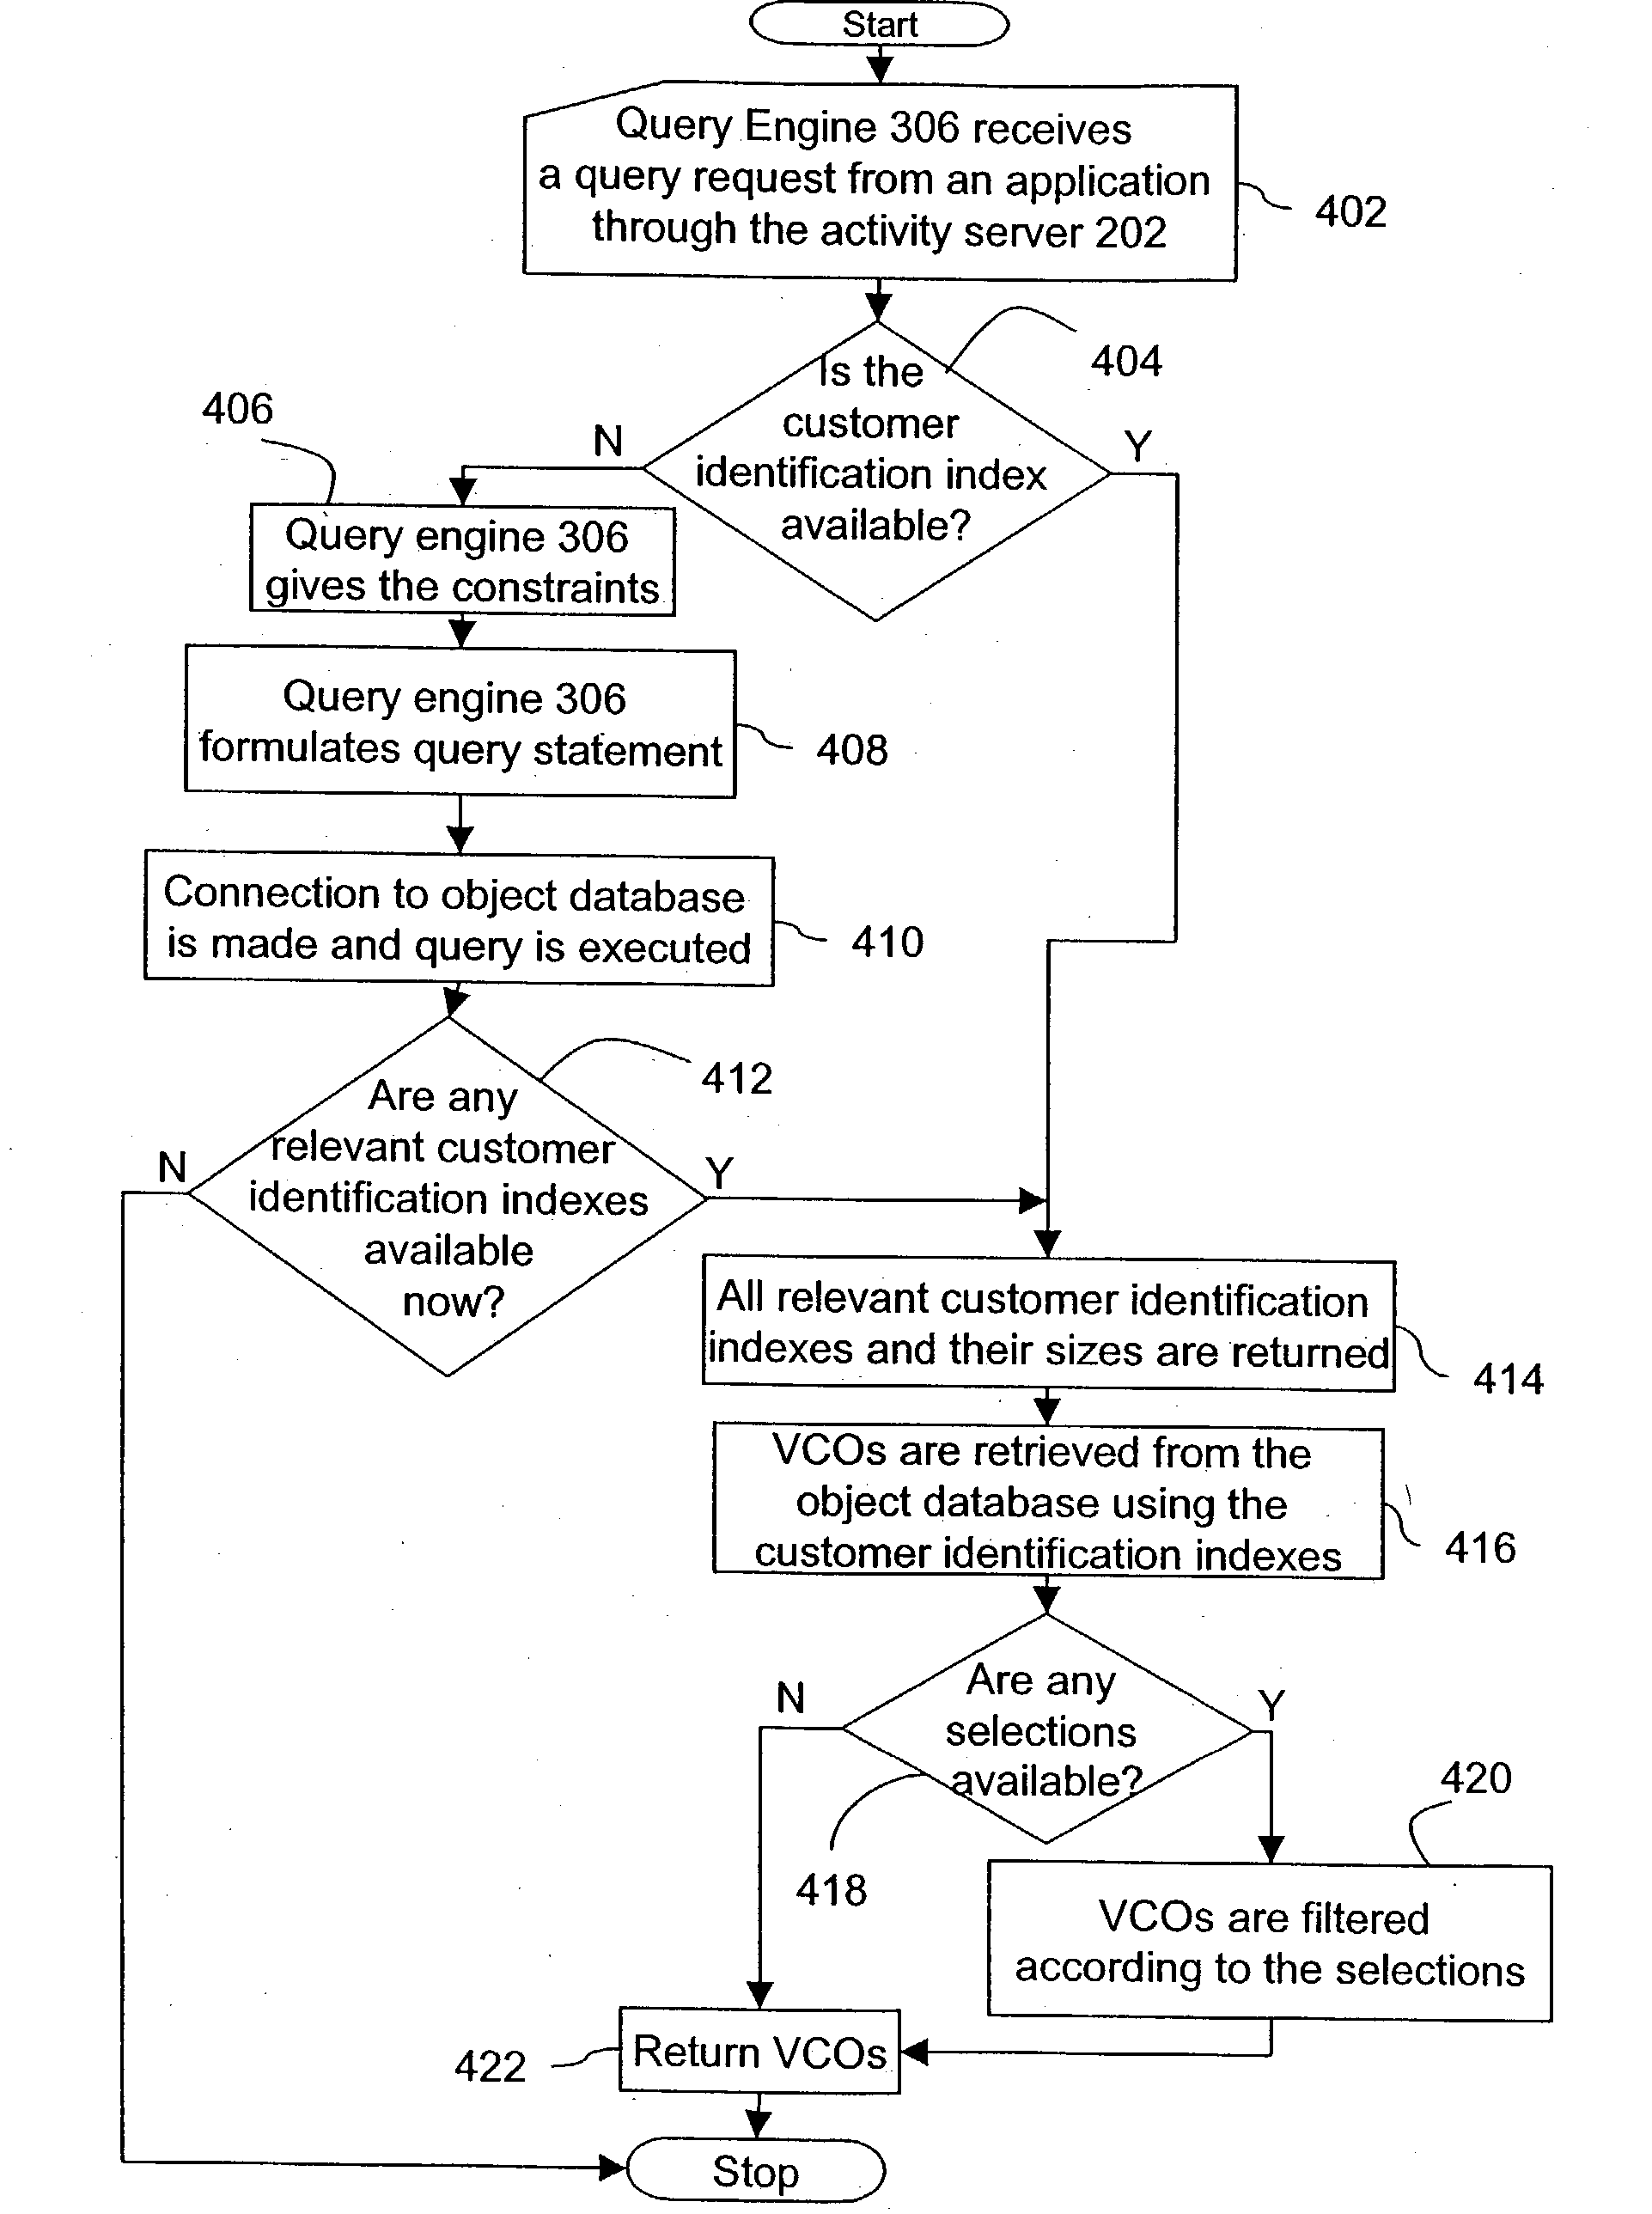 System and method for integrating, managing and coordinating customer activities